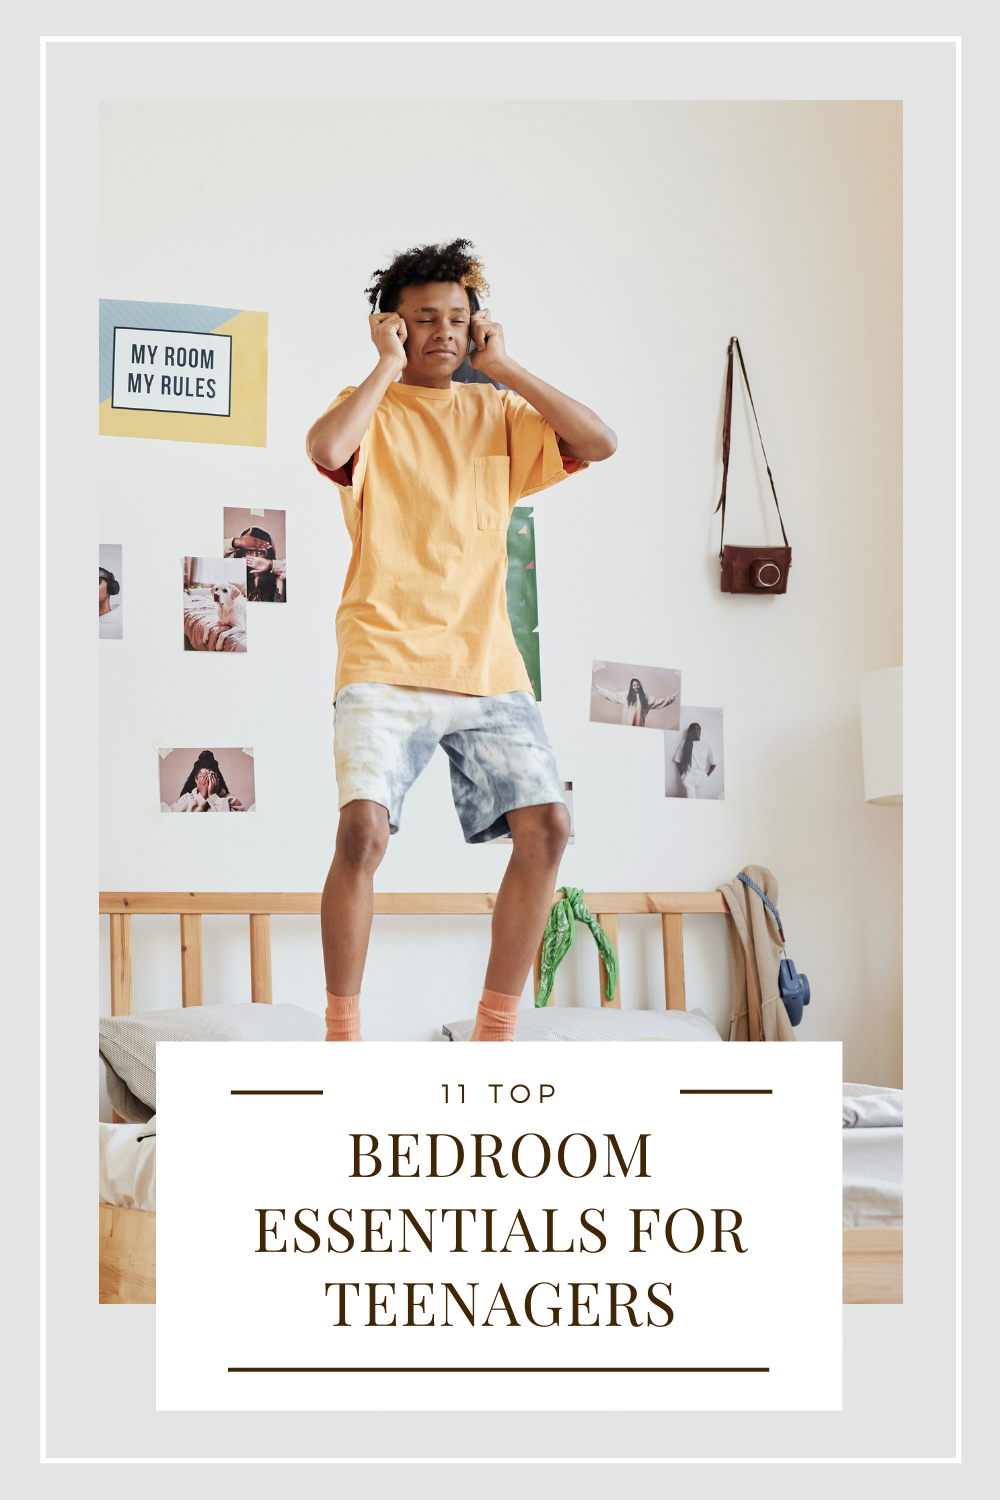 A teenager jumps on his bed. This article covers bedroom essentials for teenagers.